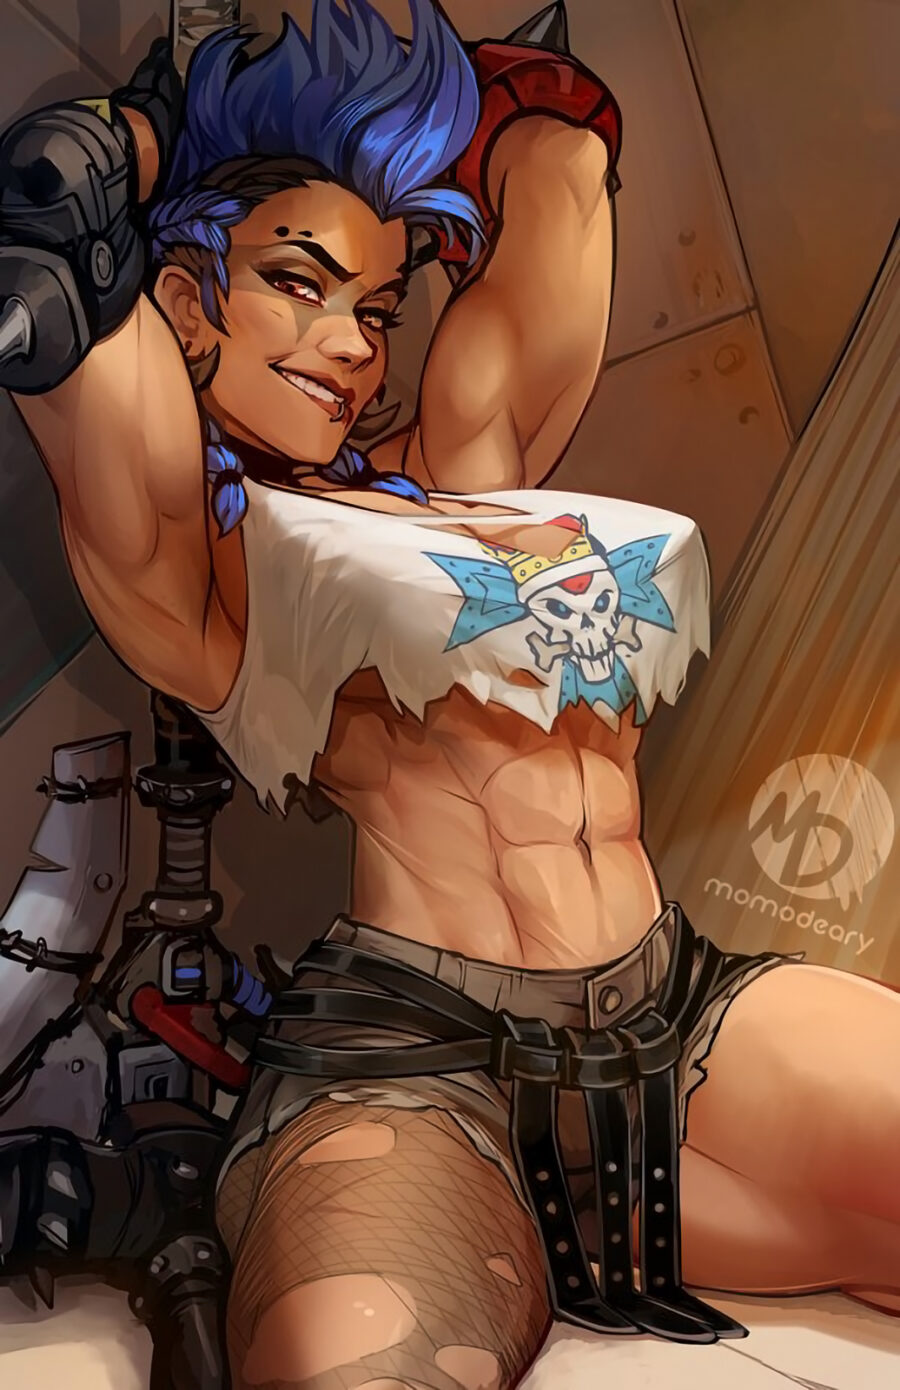 Momo-deary - Muscular Junker Queen with abs overwatch porn